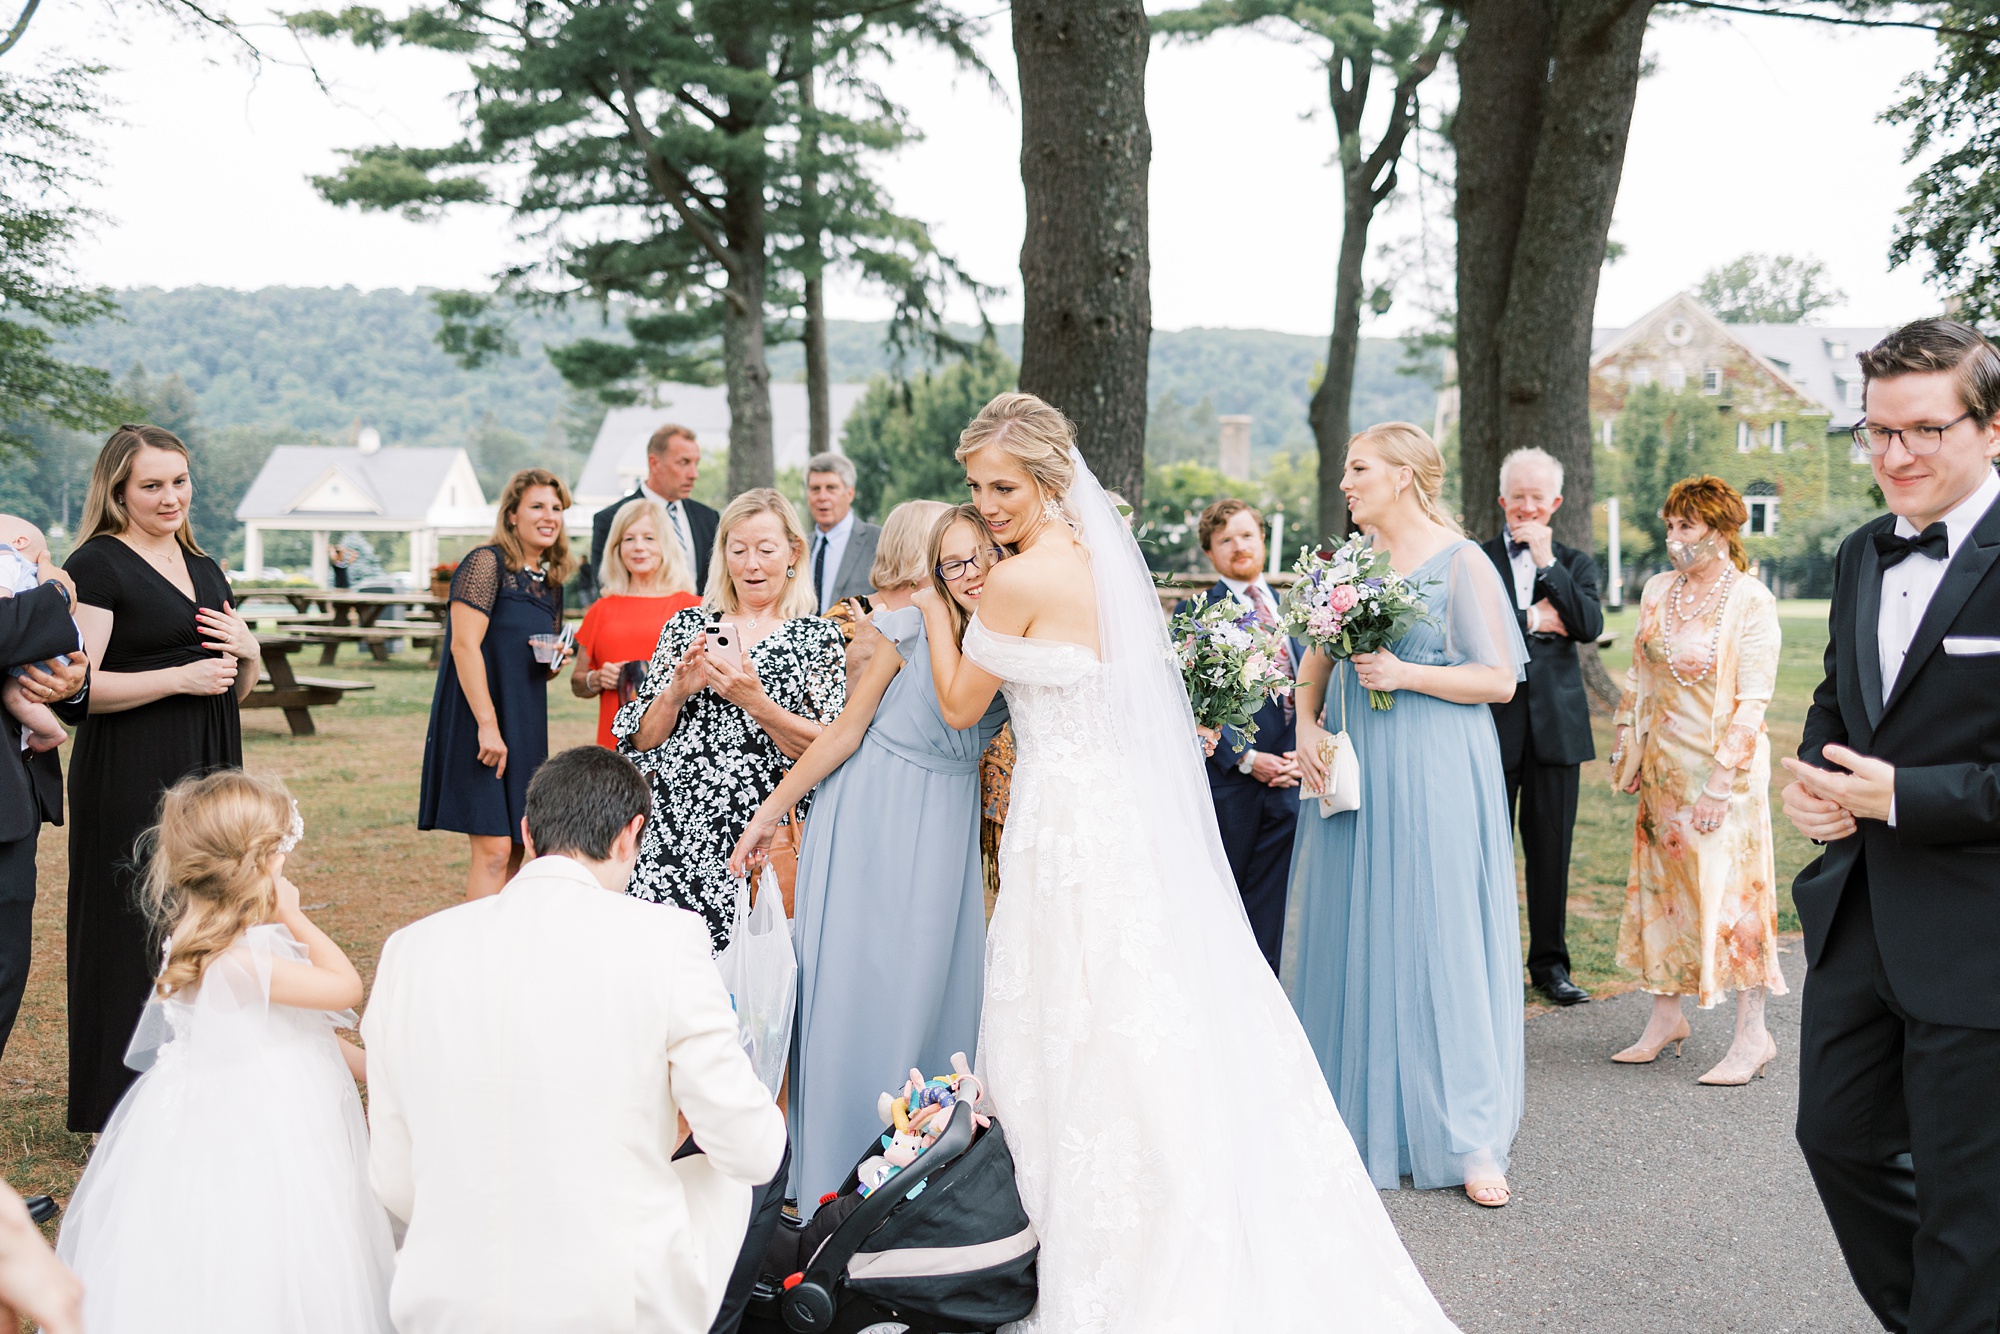 bride hugs bridesmaid after wedding ceremony on lawn at Skytop Lodge